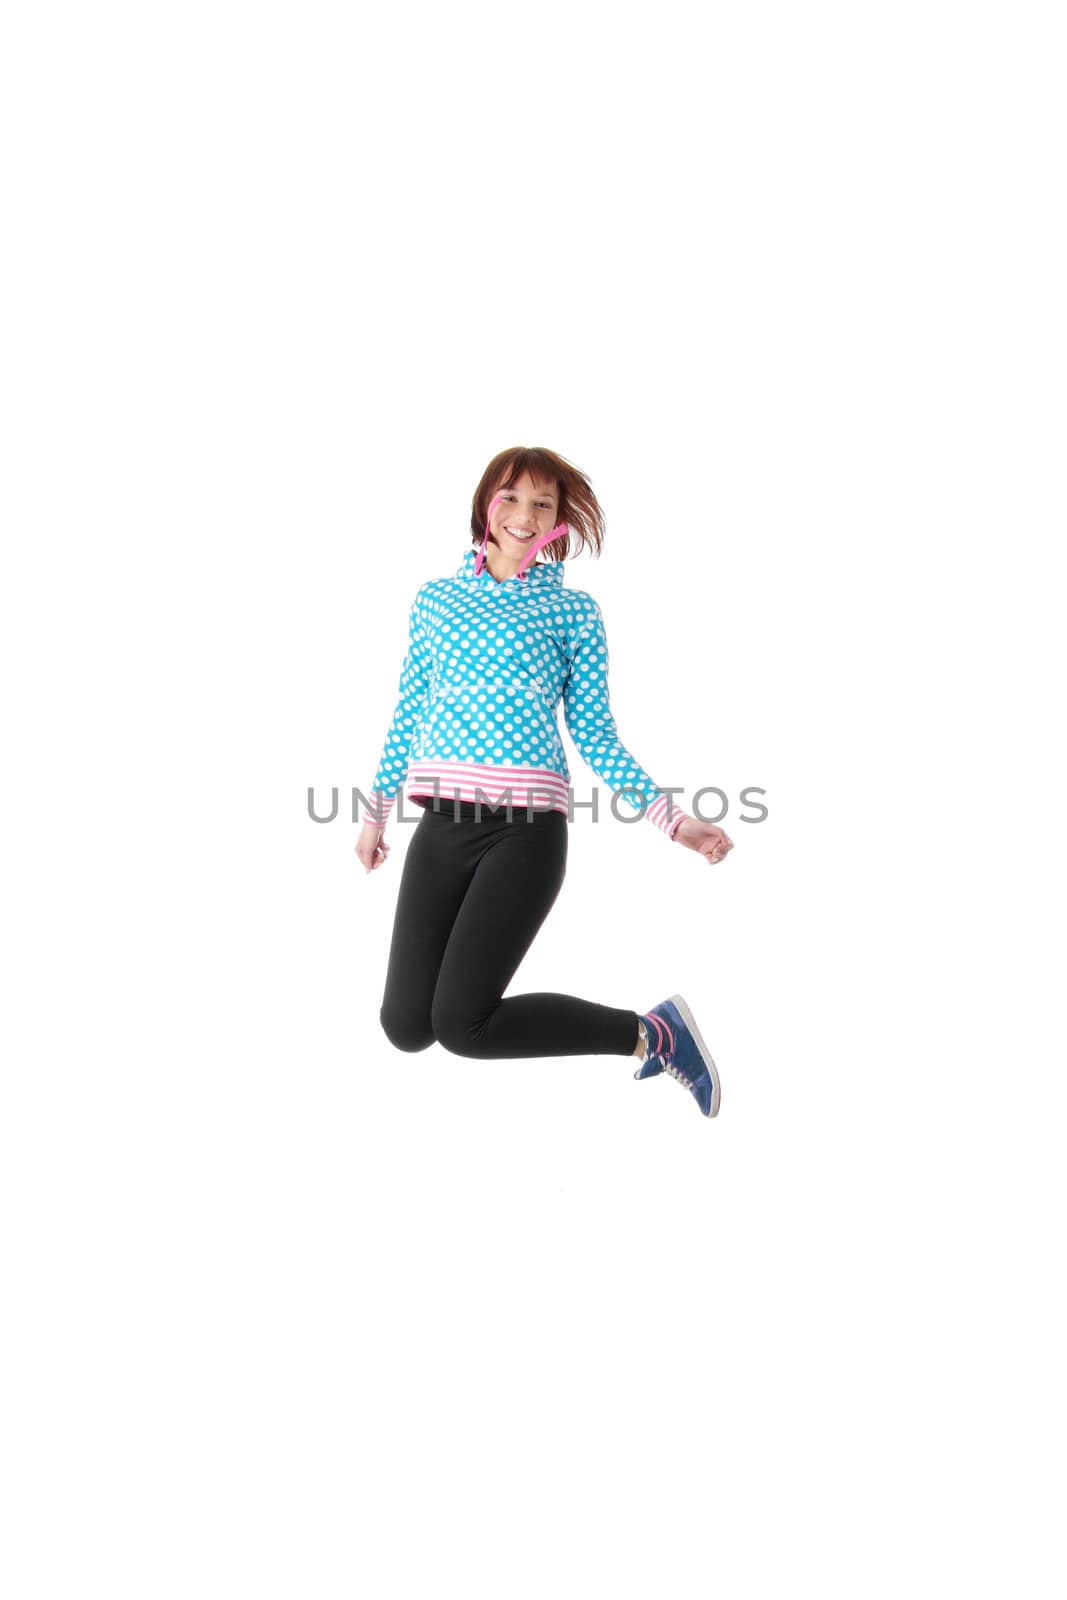 Young smiling teen girl jumping by BDS